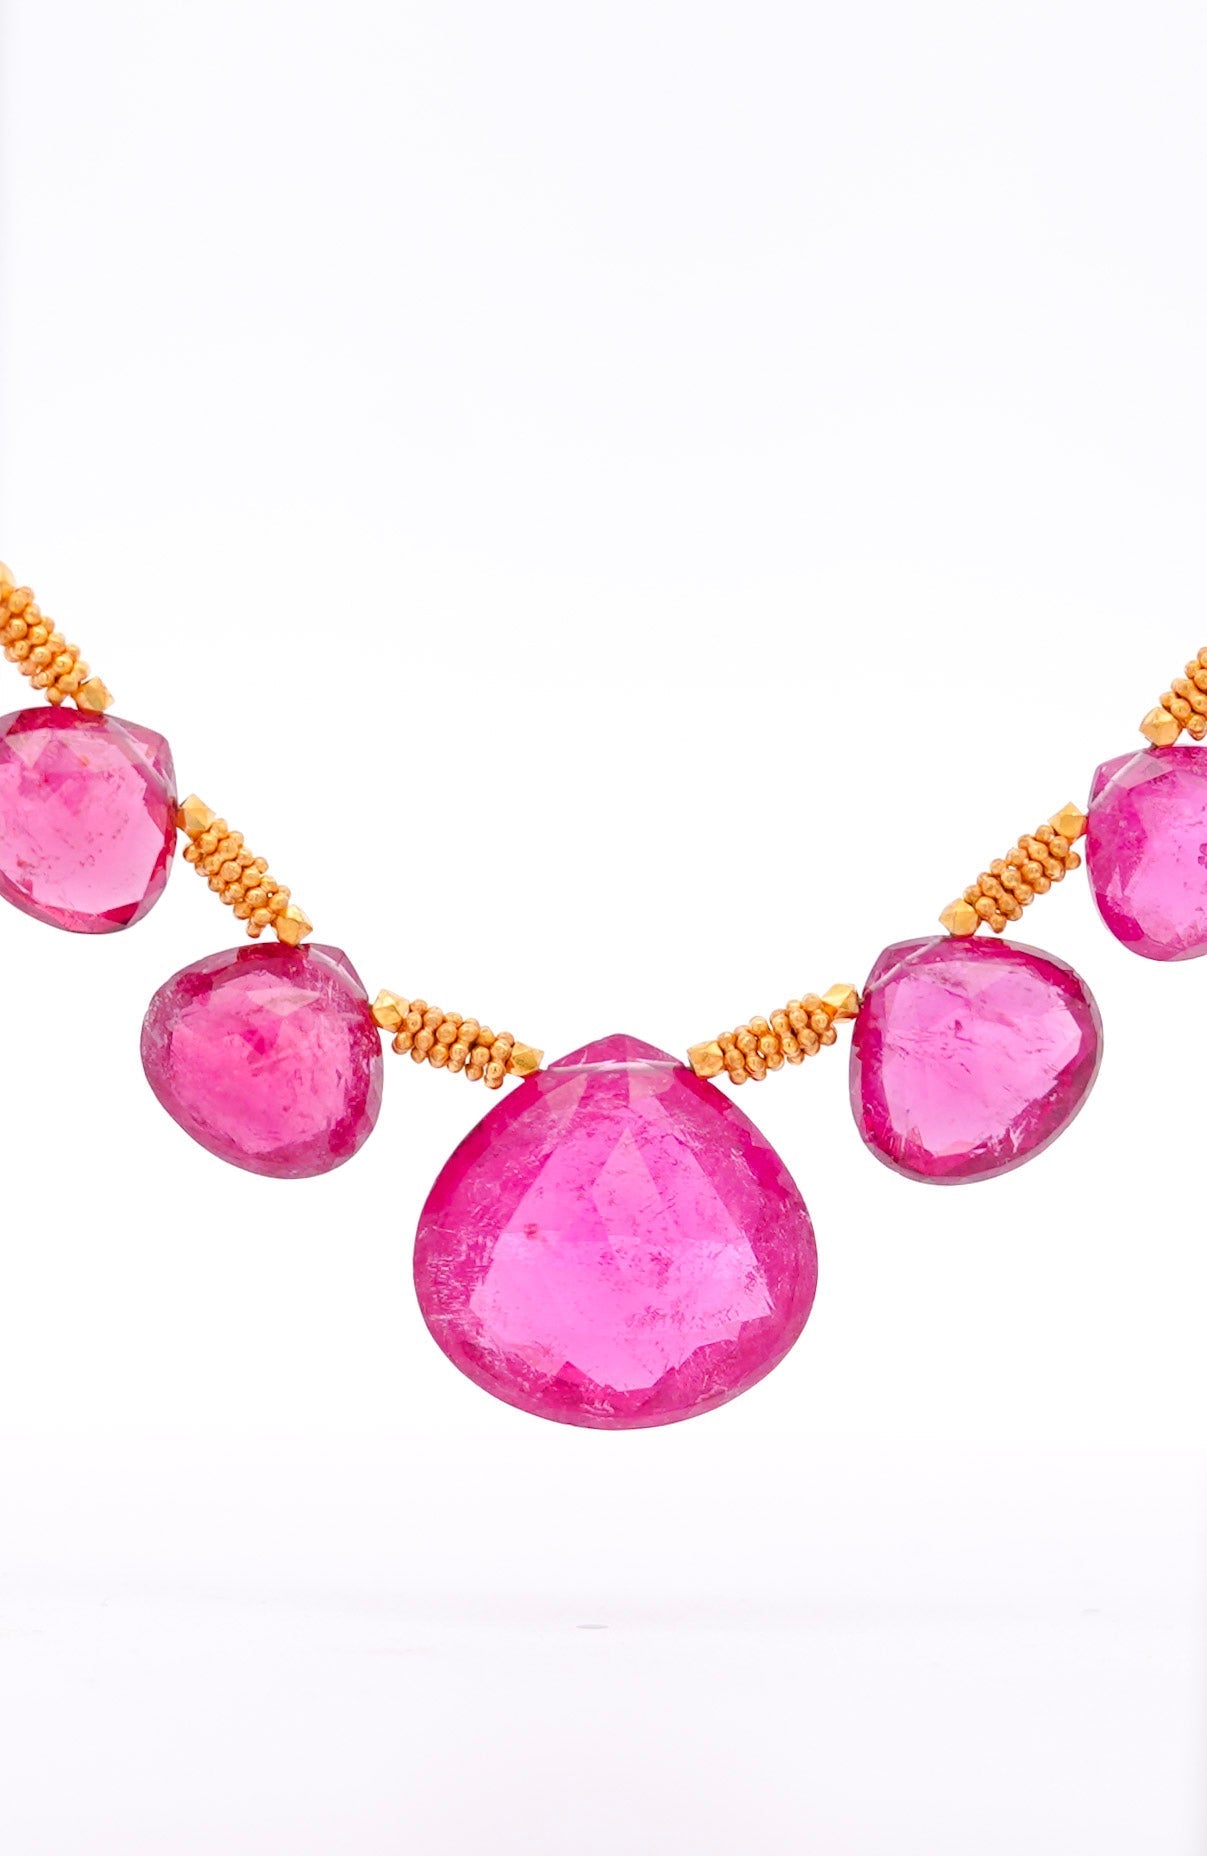 Vintage-GIA-Certified-120-Carat-Pear-Shape-Pink-Rubellite-Tourmaline-Necklace-in-22k-Yellow-Gold-Necklace-2_b5a18ea8-1bab-4d6d-a257-9039027f6fe6.jpg